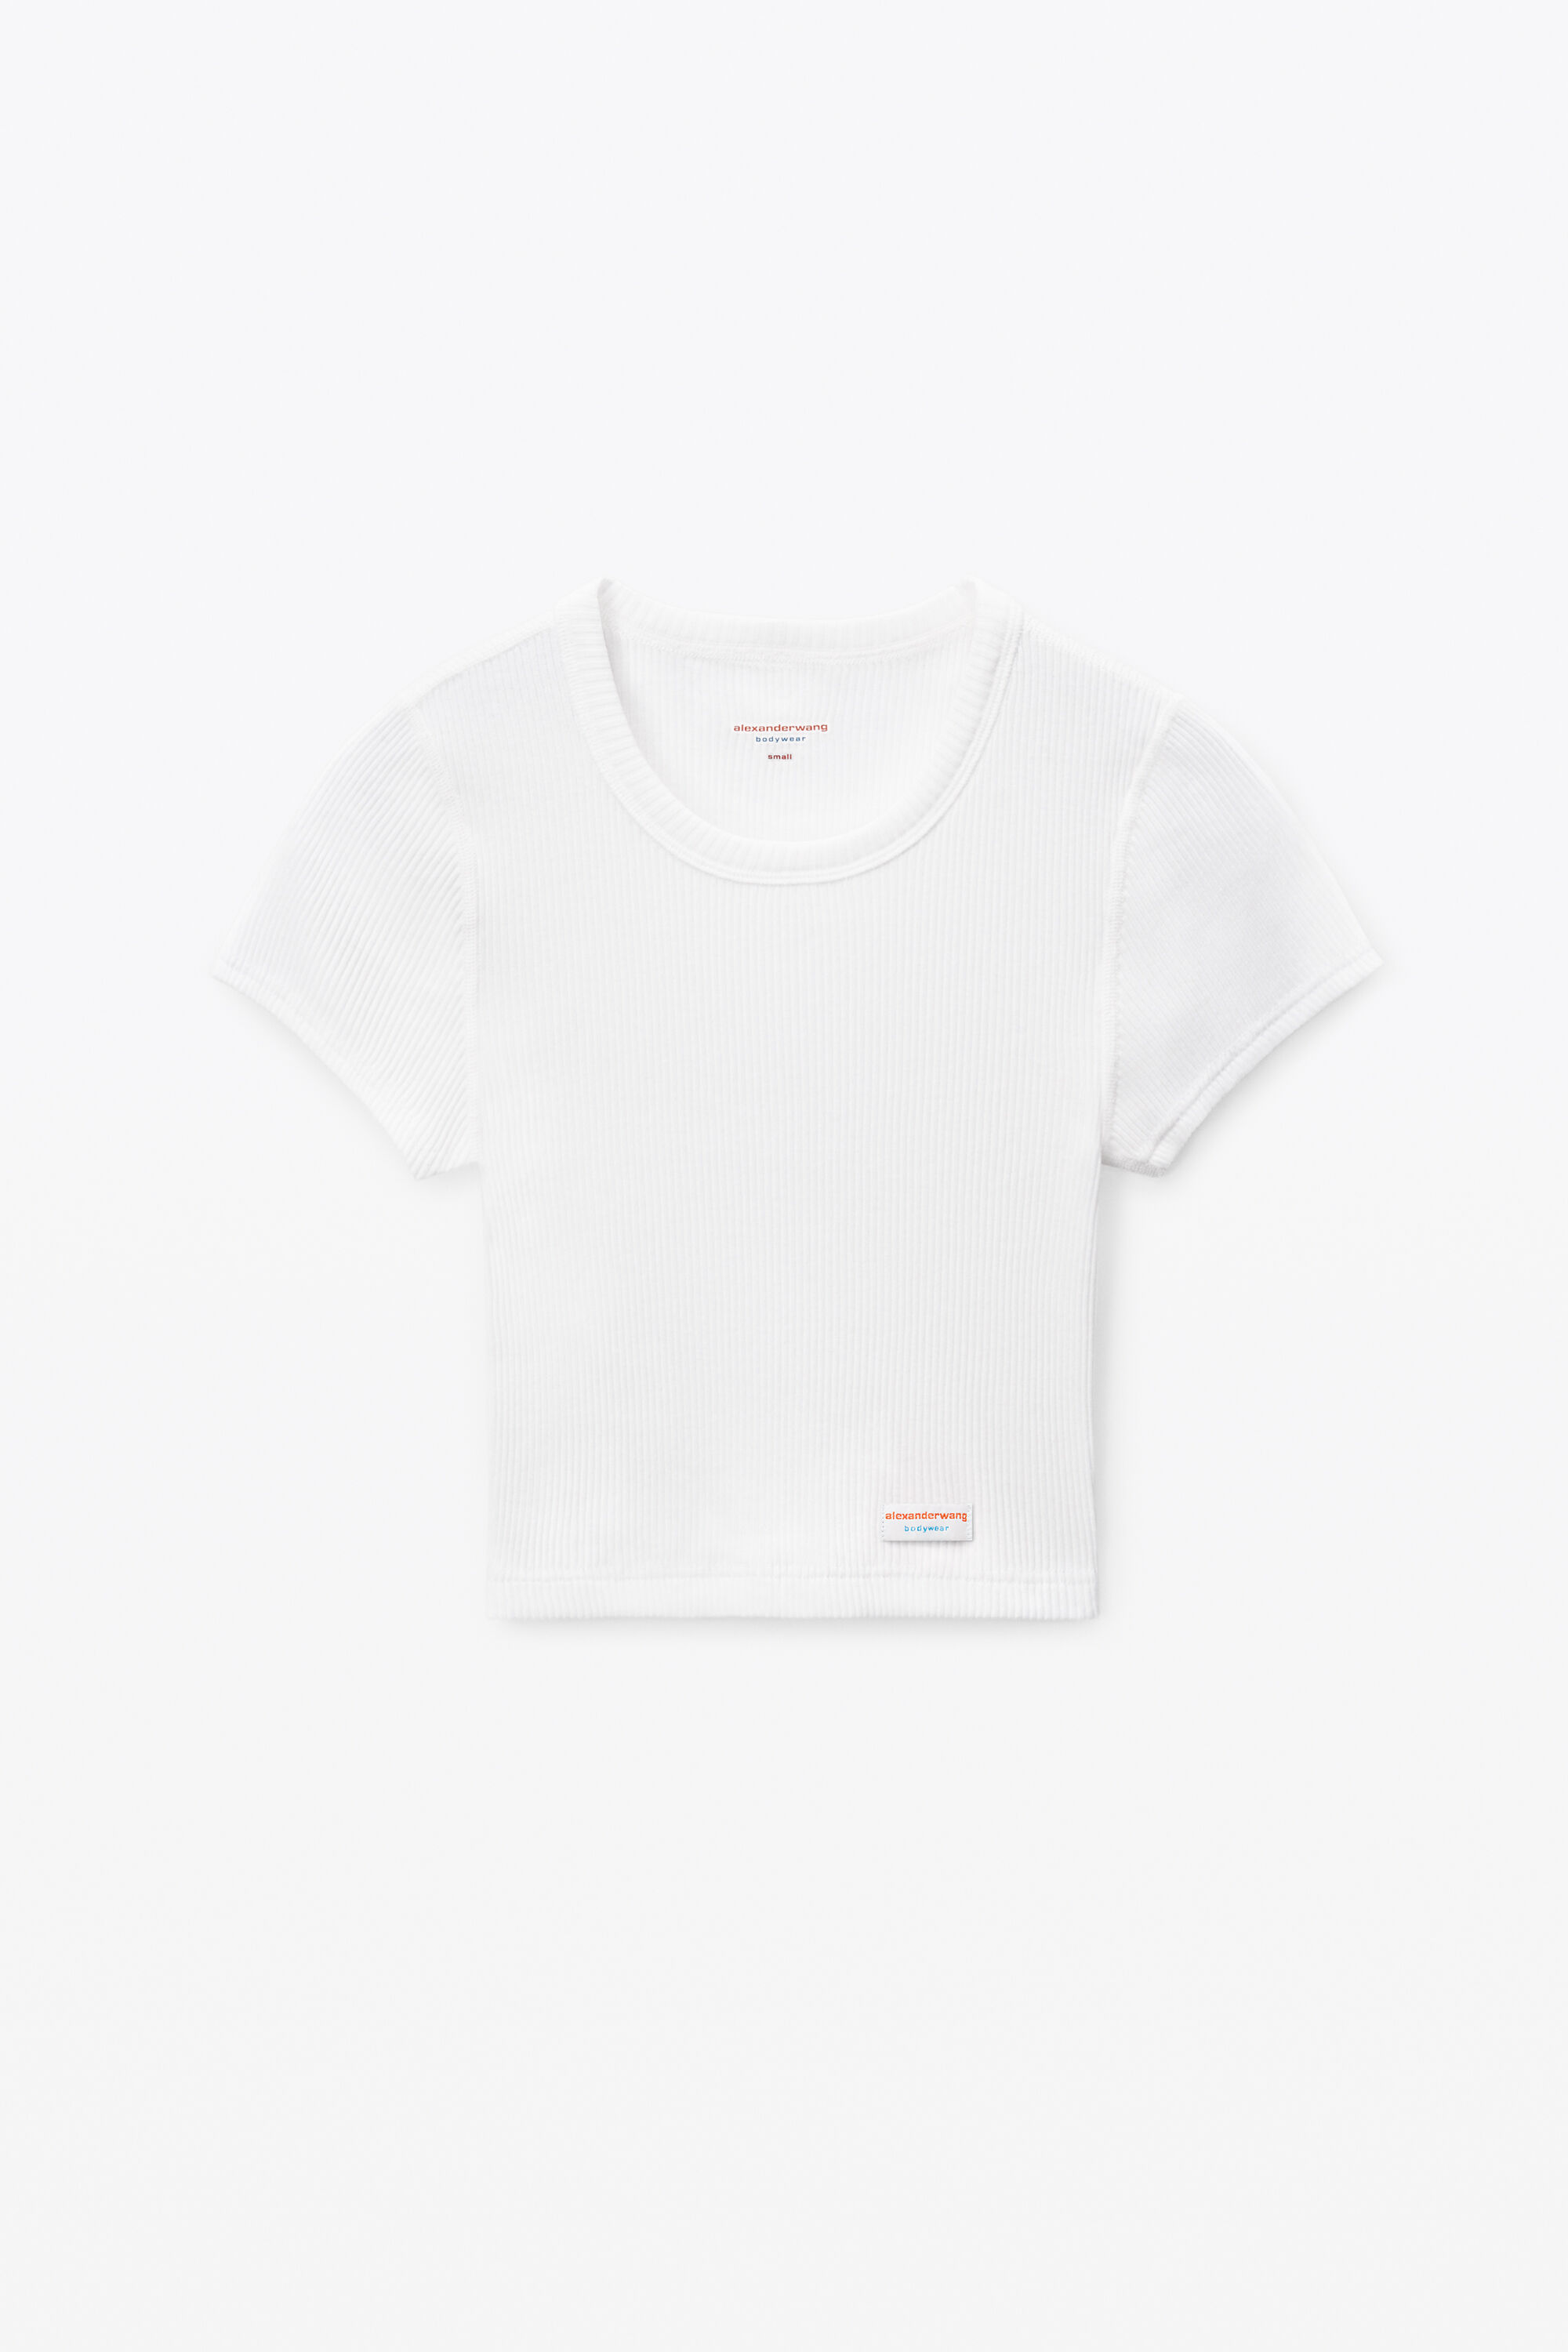 alexanderwang Cropped Short-Sleeve Tee in Ribbed Cotton Jersey